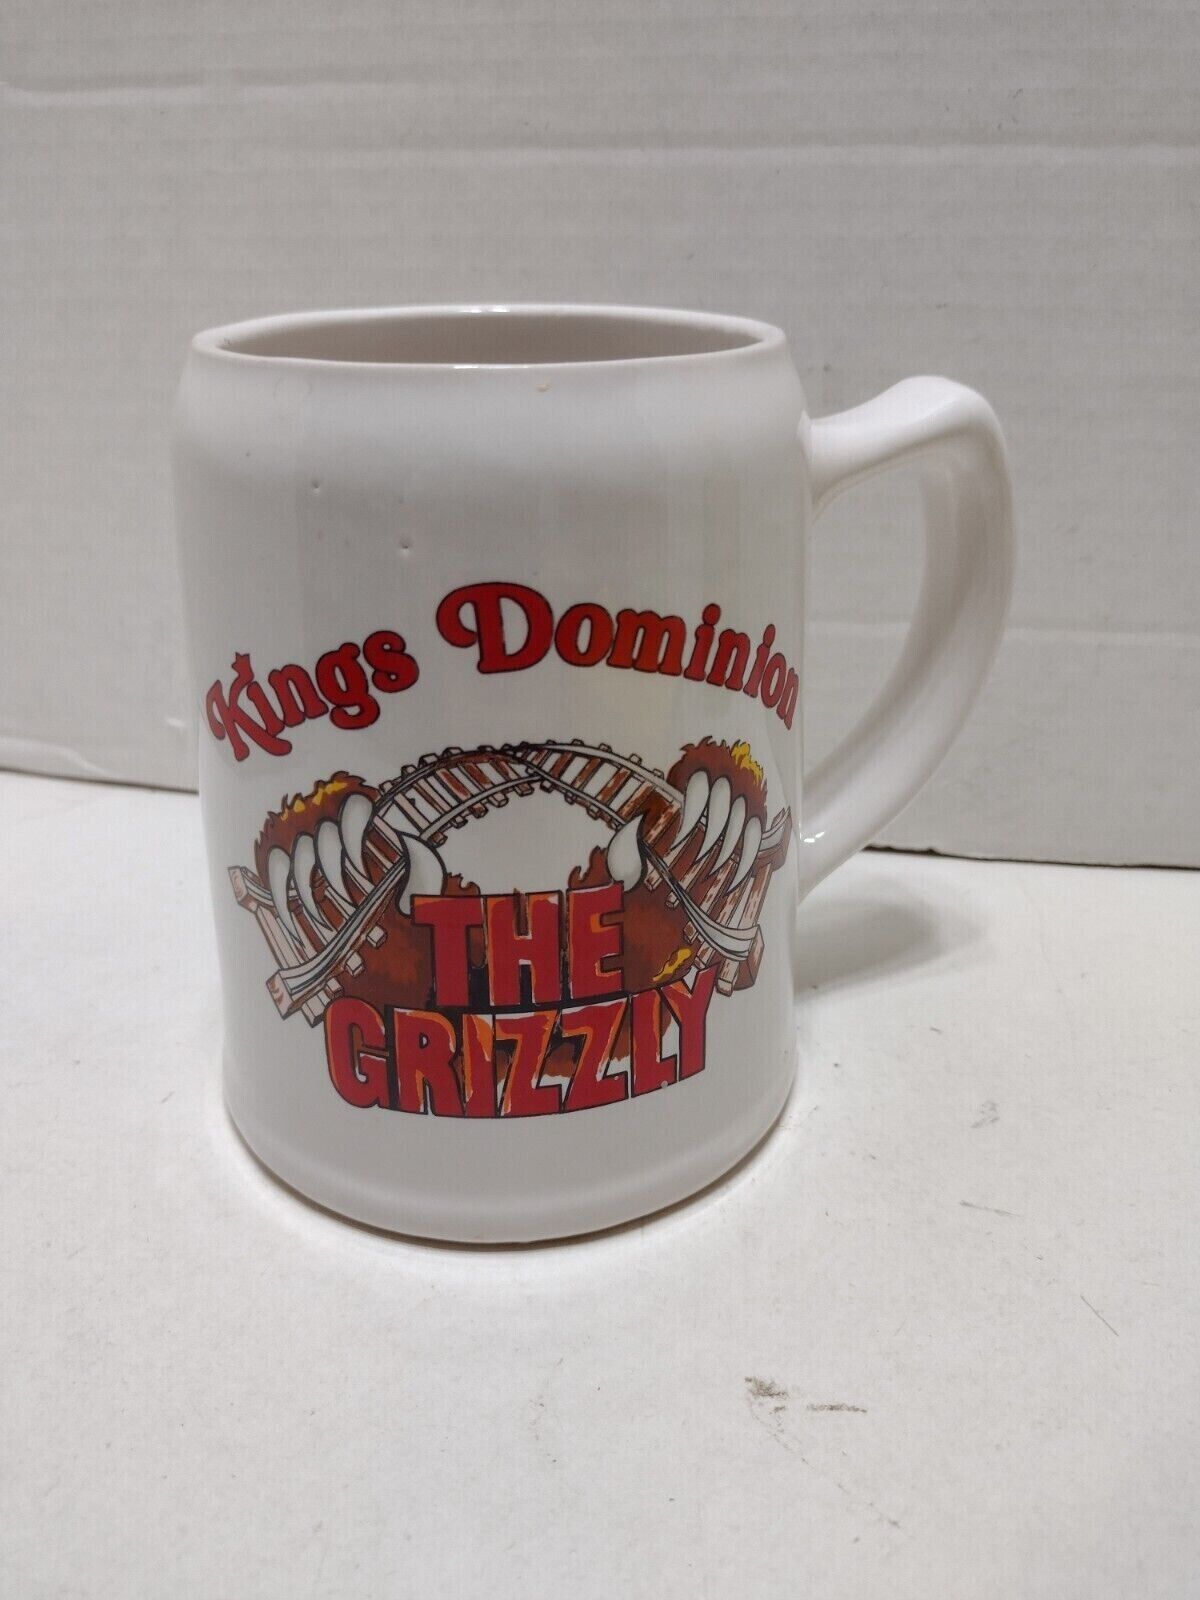 RARE Vintage Kings Dominion THE GRIZZLY Wooden Roller Coaster Mug Cup